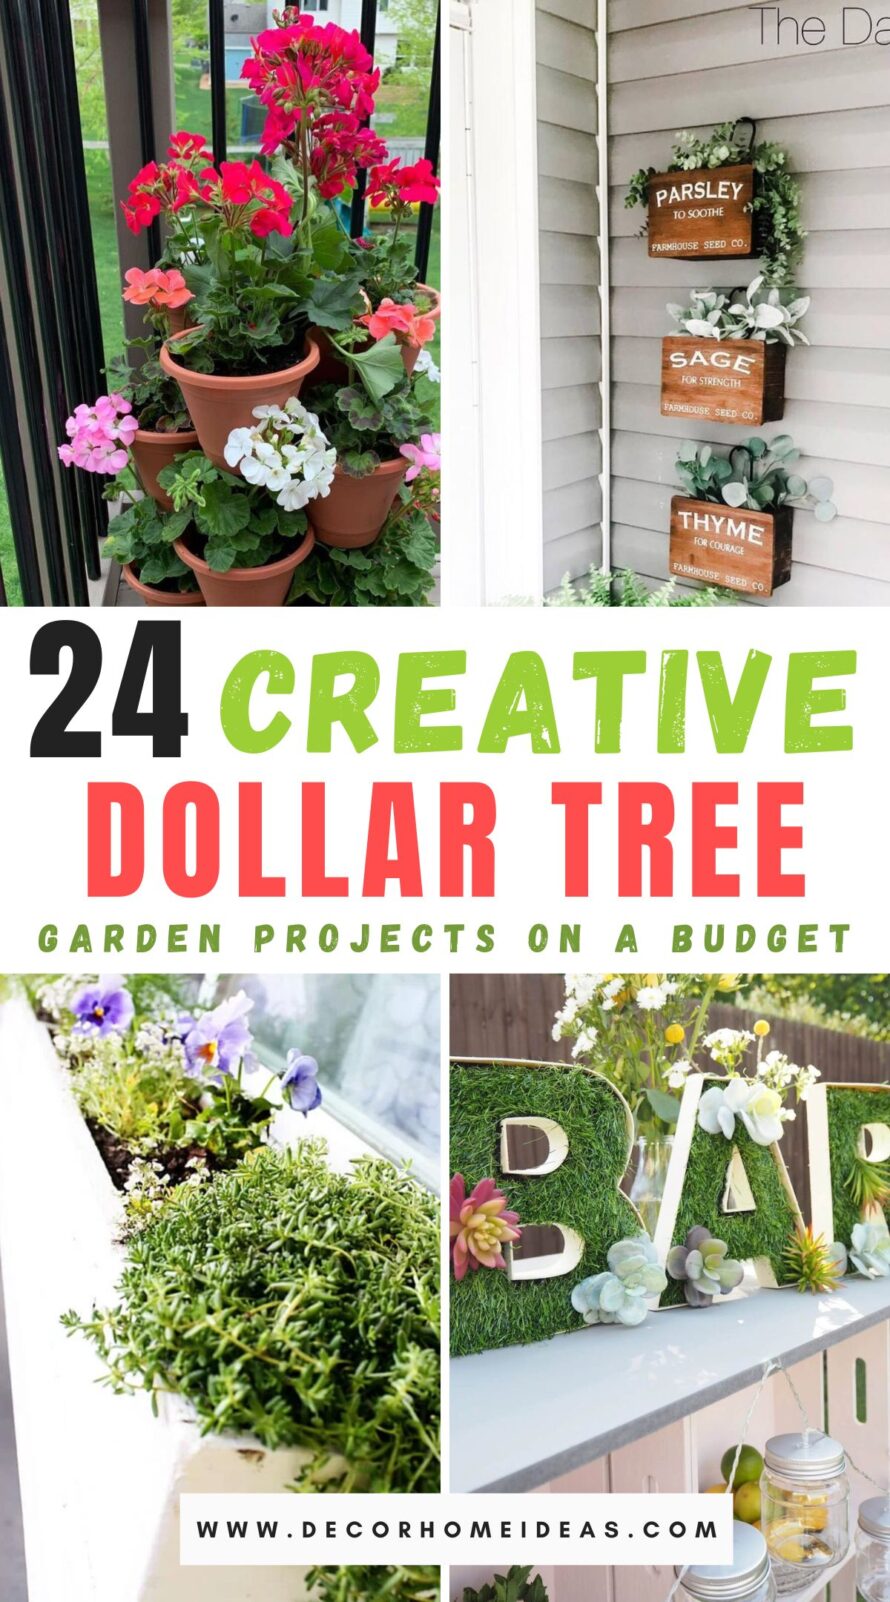 Transform your garden without breaking the bank with these 24 budget-friendly ideas sourced straight from the Dollar Tree. From DIY planters to decorative accents, discover how to create a stunning outdoor space on a dime.